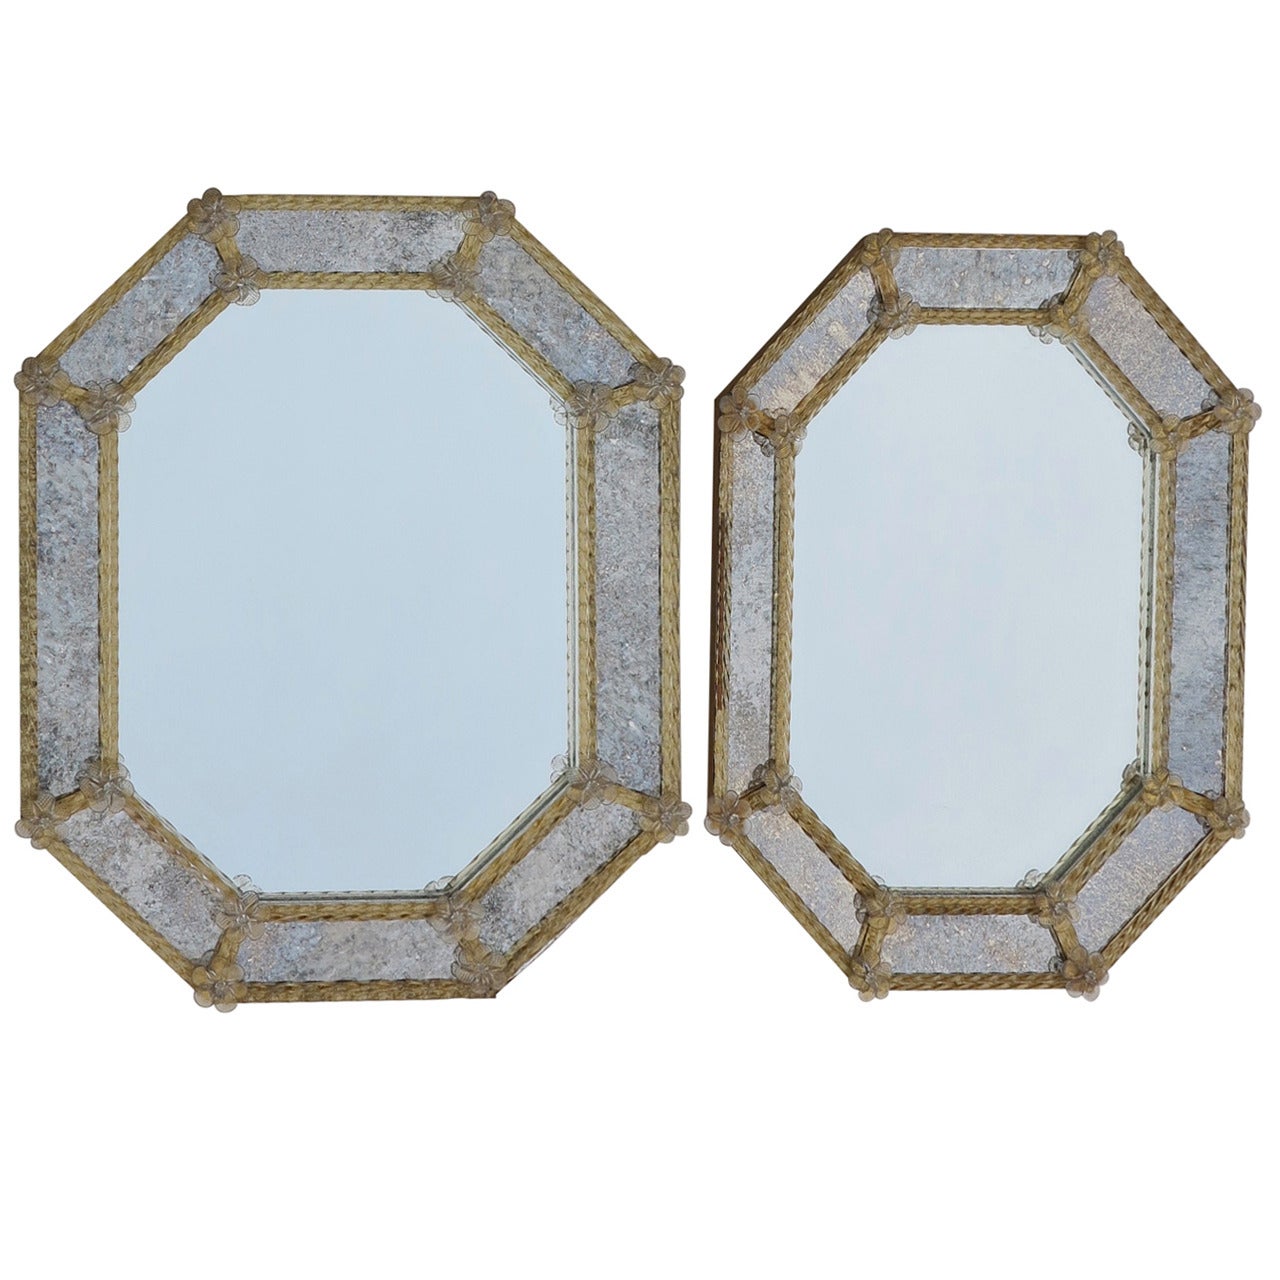 Pair of Octagonal Mirrors Veronése with Parecloses and Oxidized Mirror